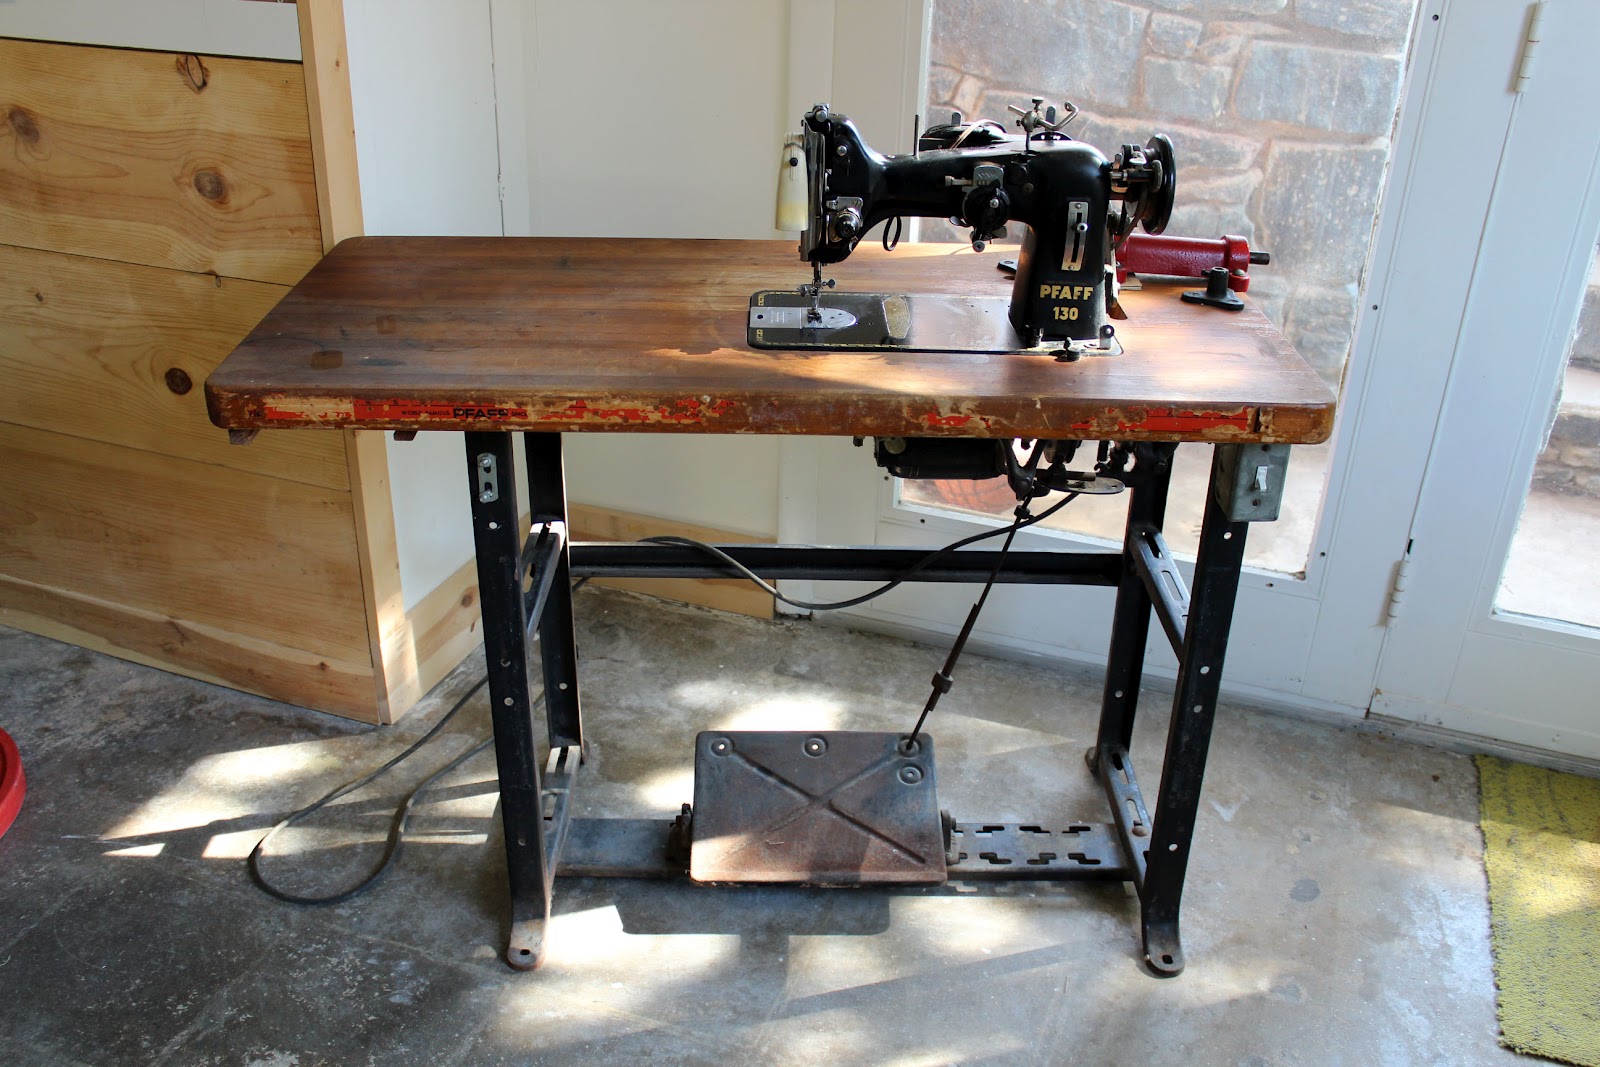 A Sewing Life: Pfaff 130 in an Industrial Table